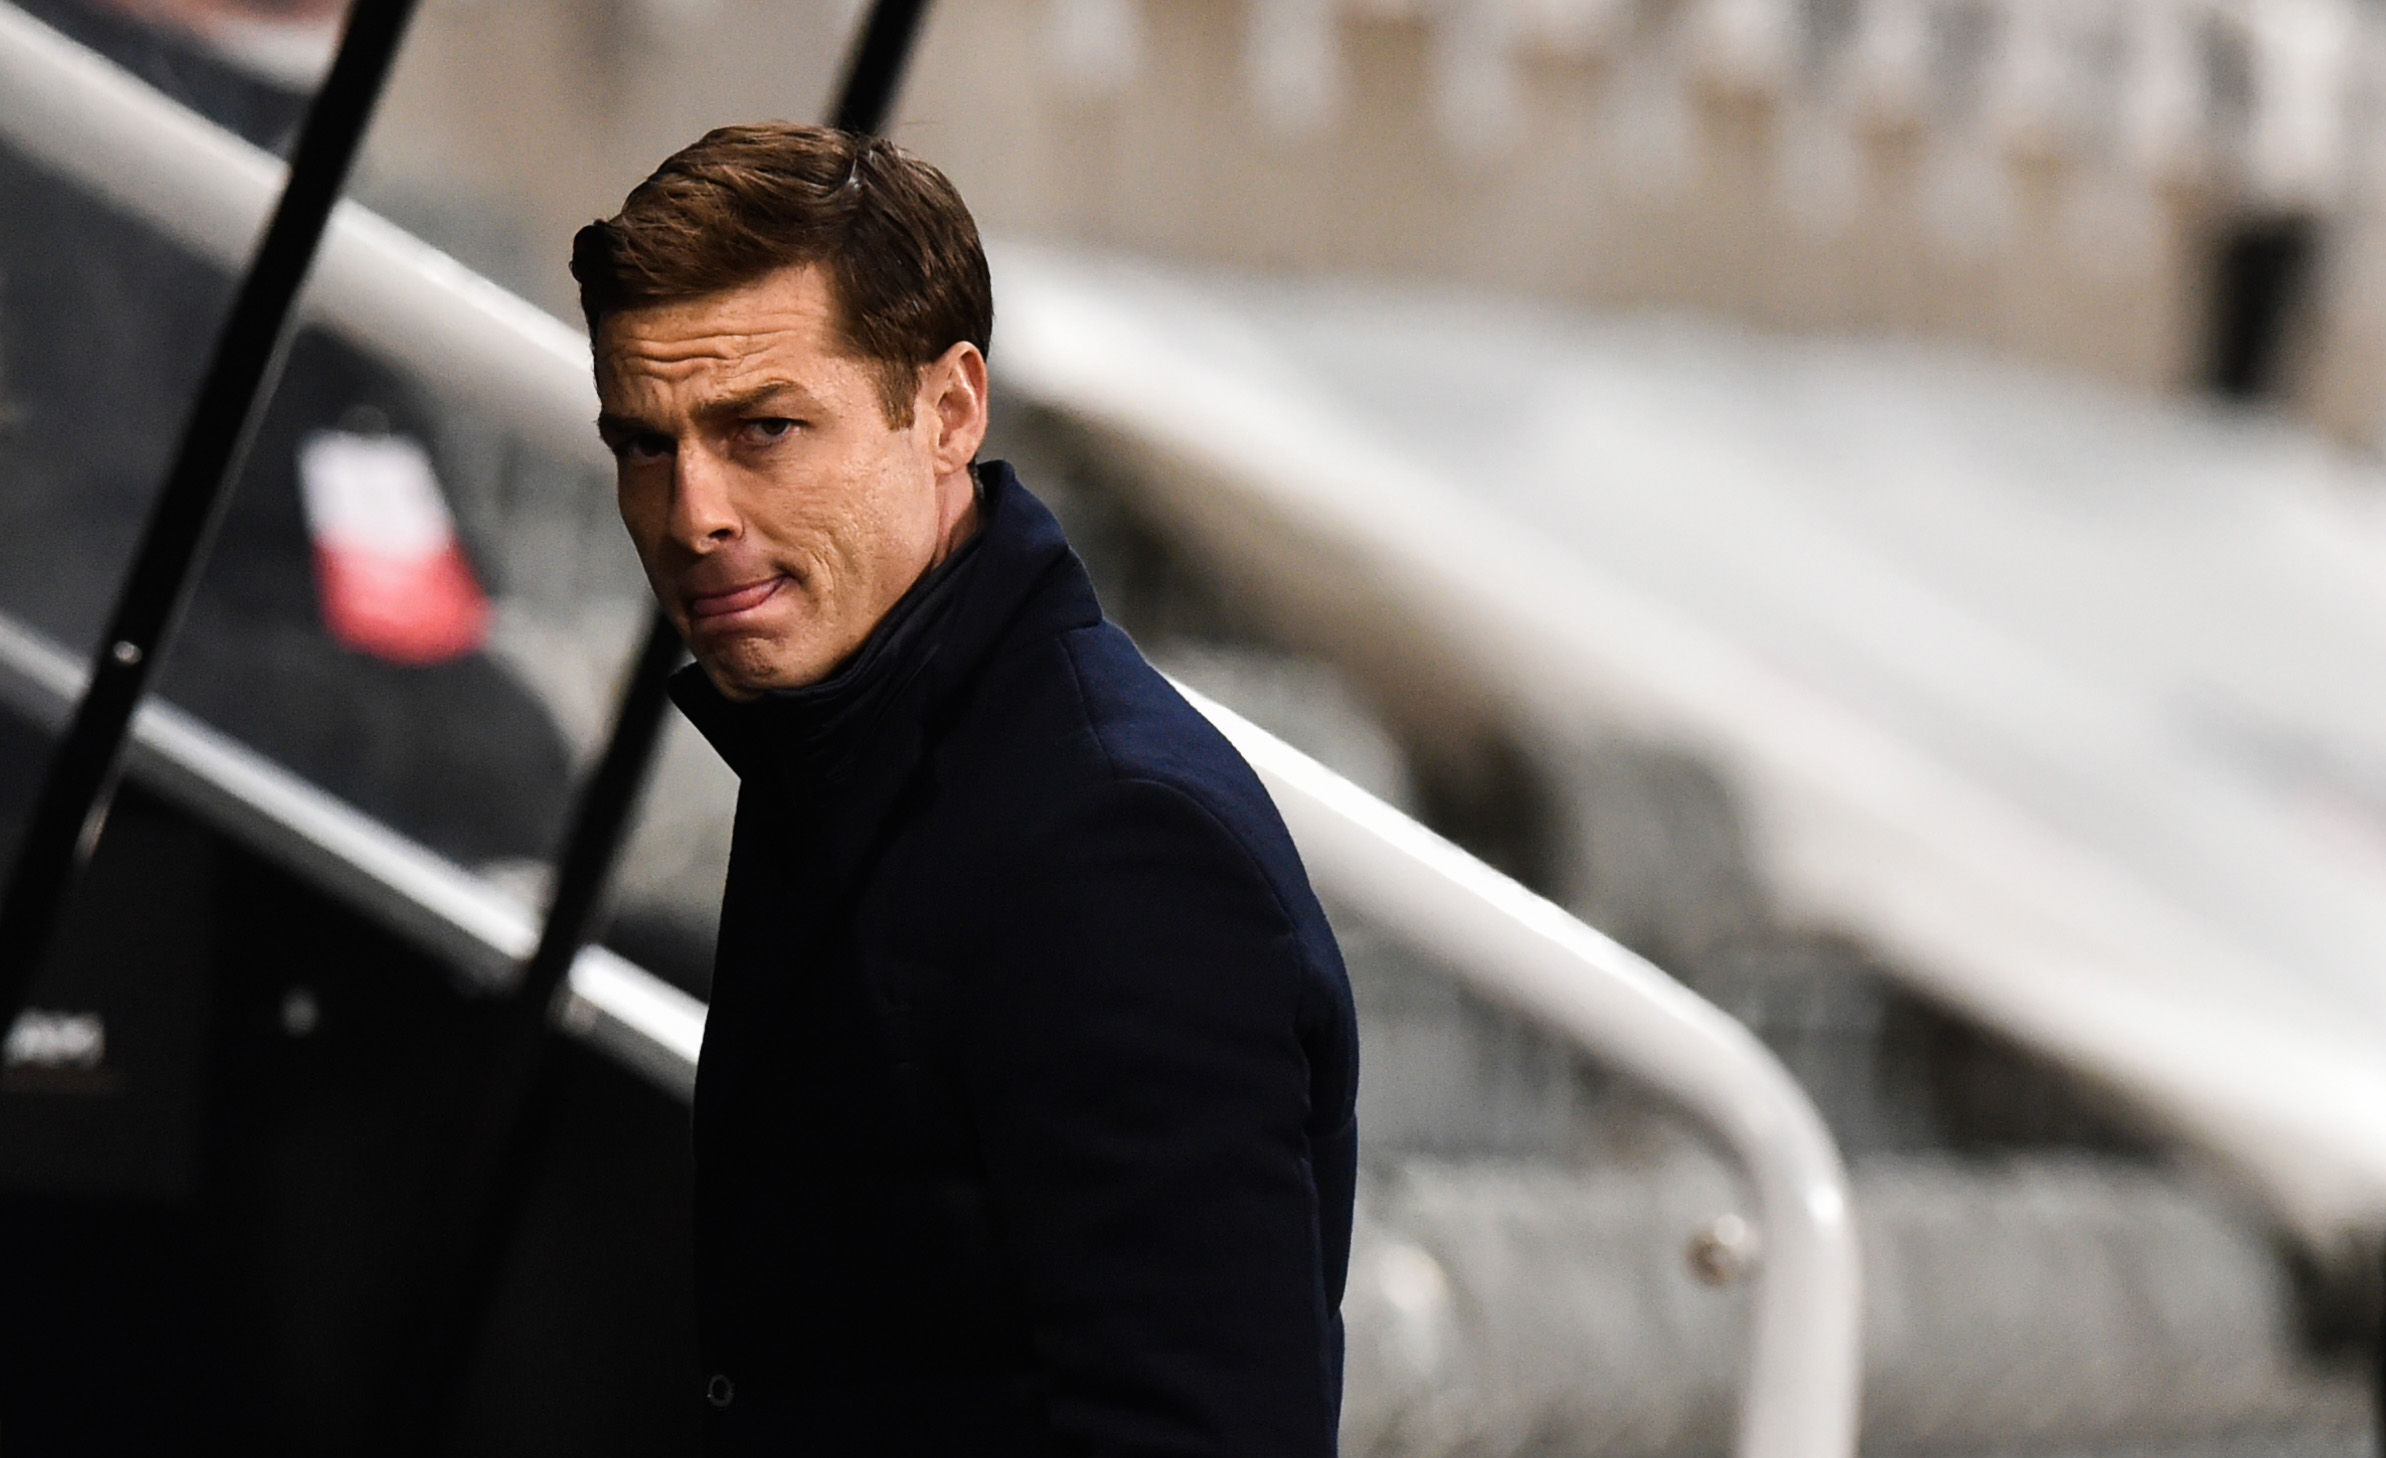 Fulham Manager Scott Parker doubtful over Burnley match with coronavirus playing spoilsport in Premier League